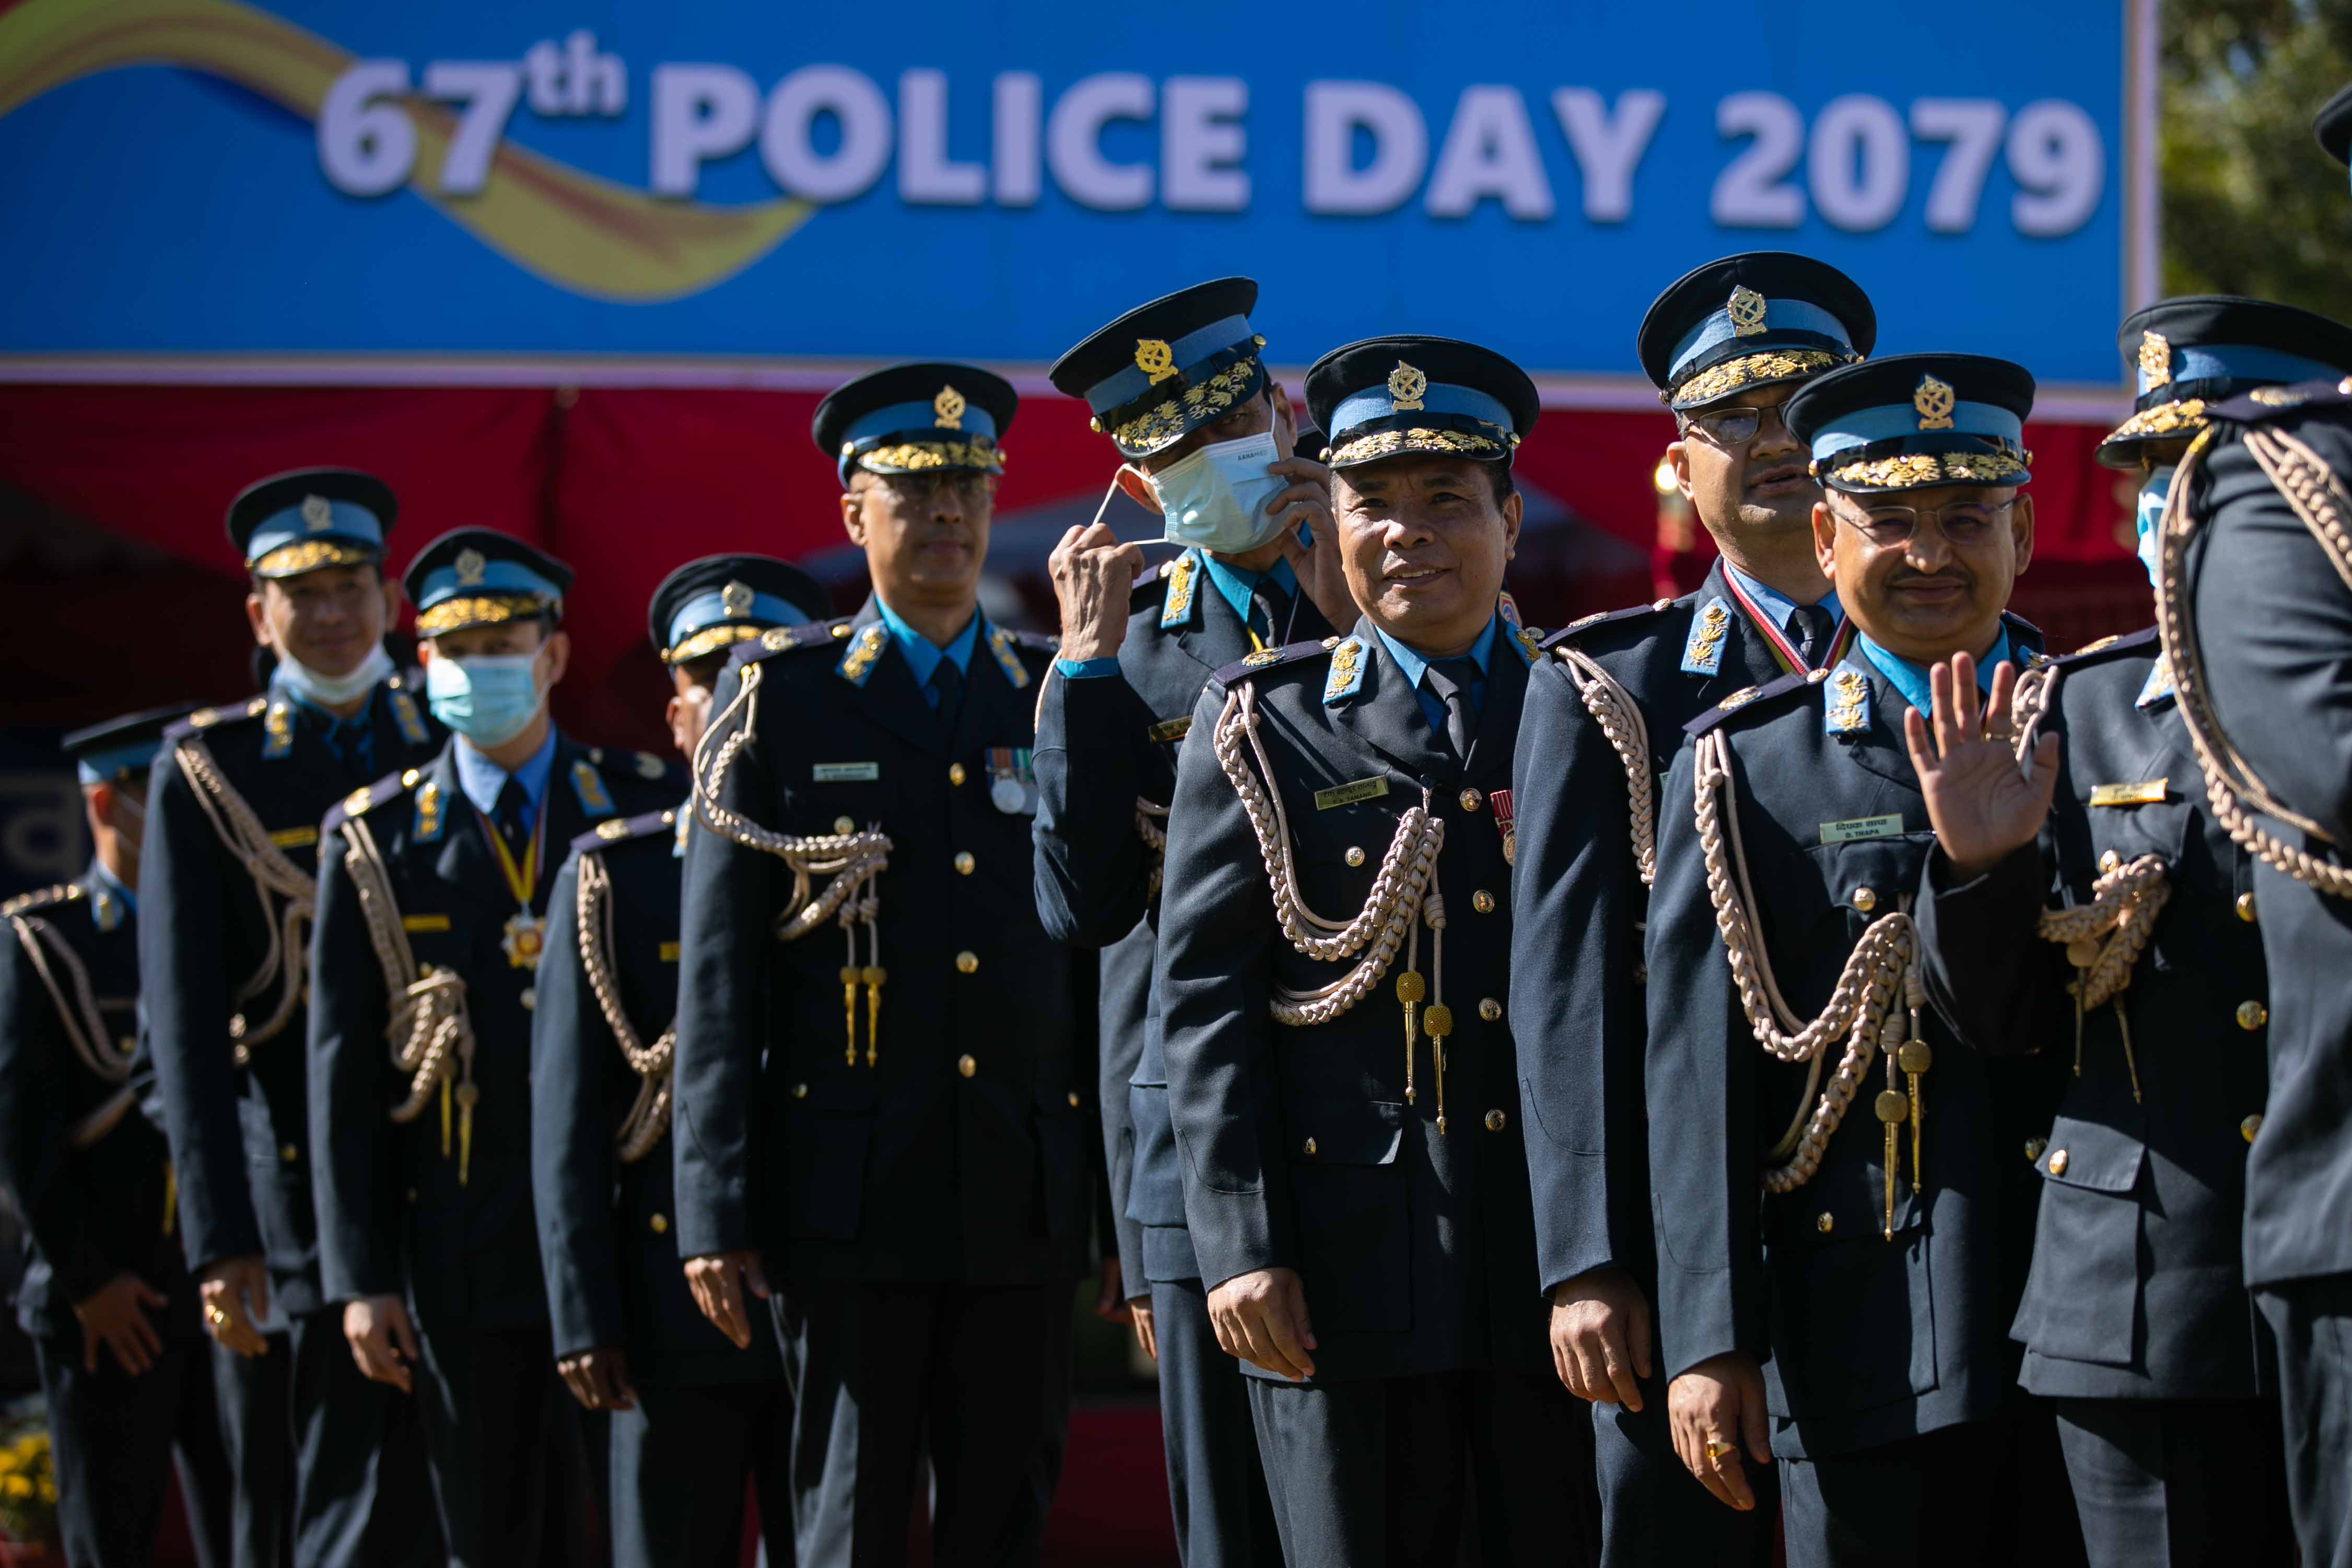 essay on role of nepal police in community